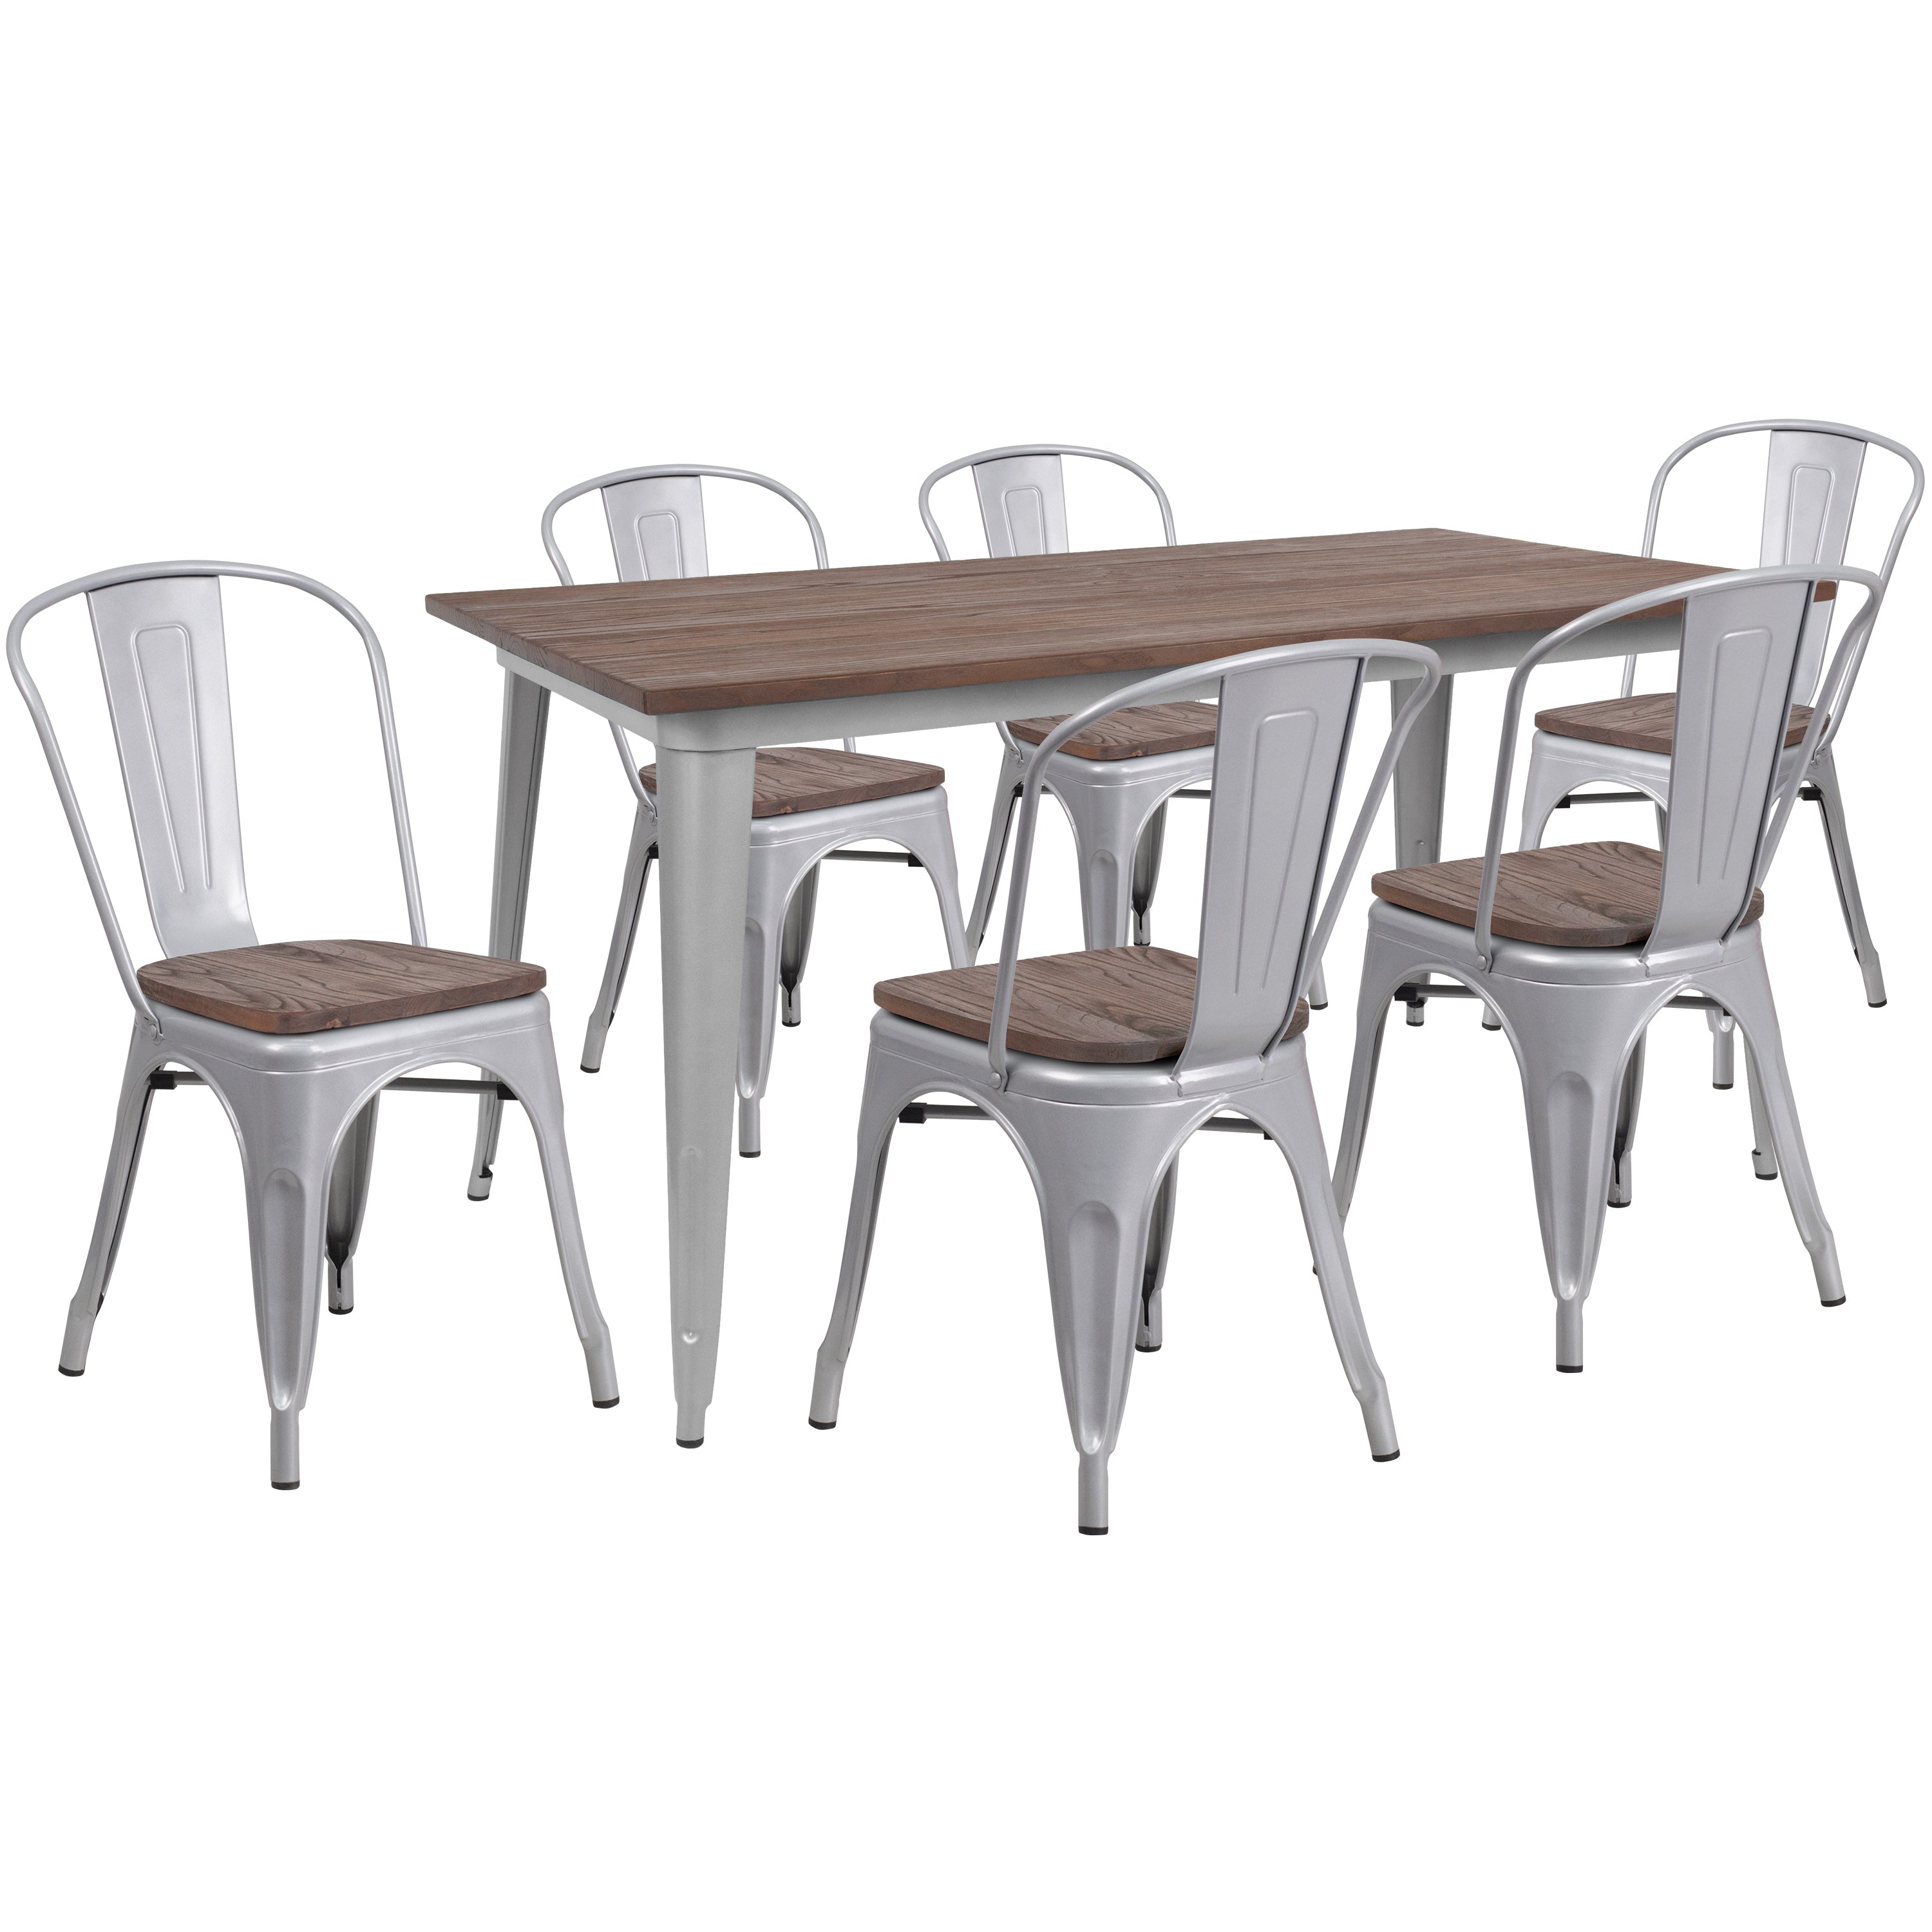 30.25" x 60" Metal Table Set with Wood Top and 6 Stack Chairs-Metal/ Colorful Table and Chair Set-Flash Furniture-Wall2Wall Furnishings